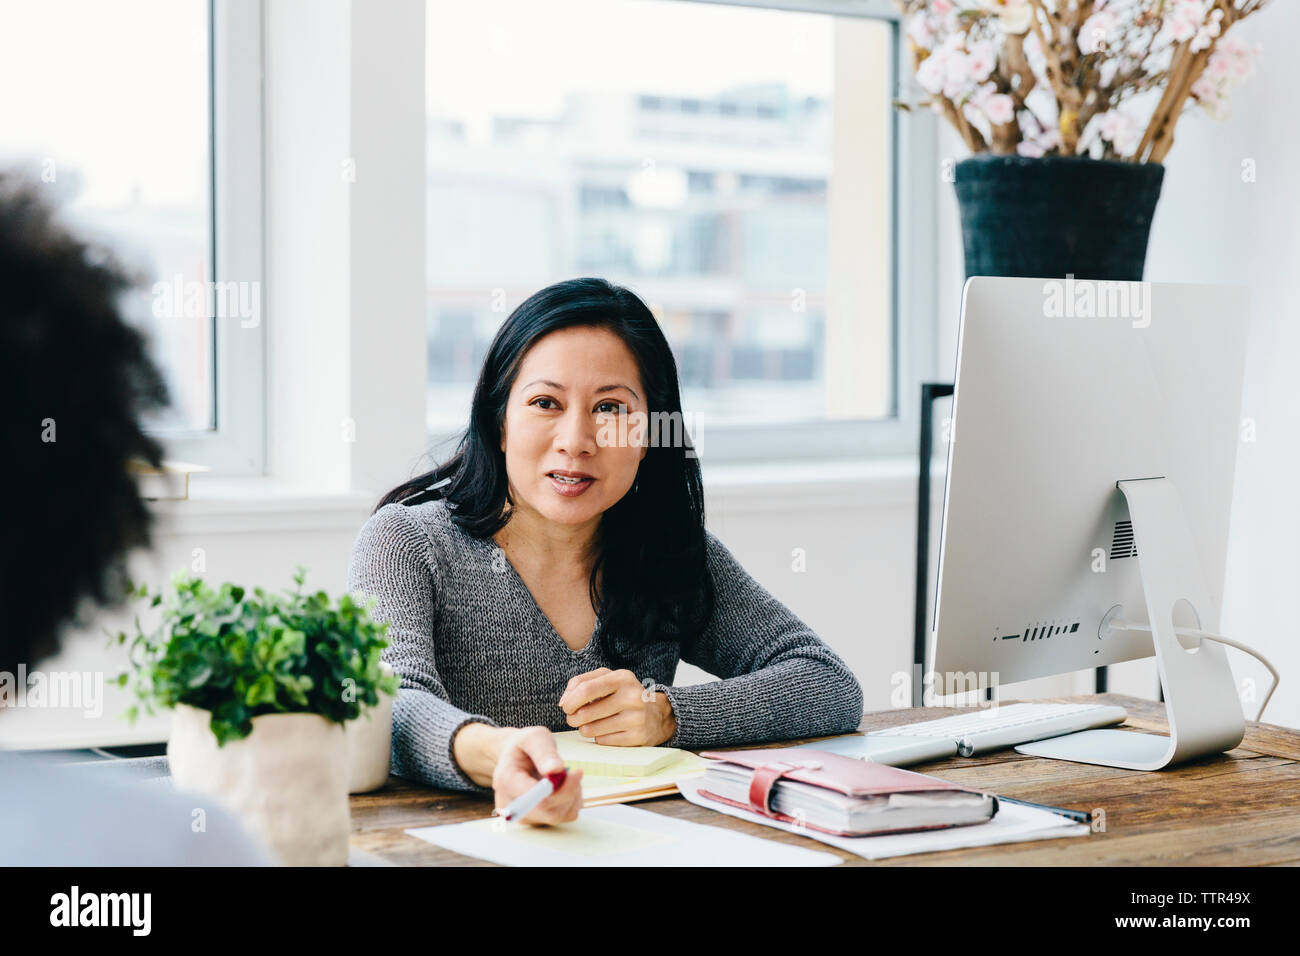 businesswoman talking with female colleague while working at desk in office Stock Photo